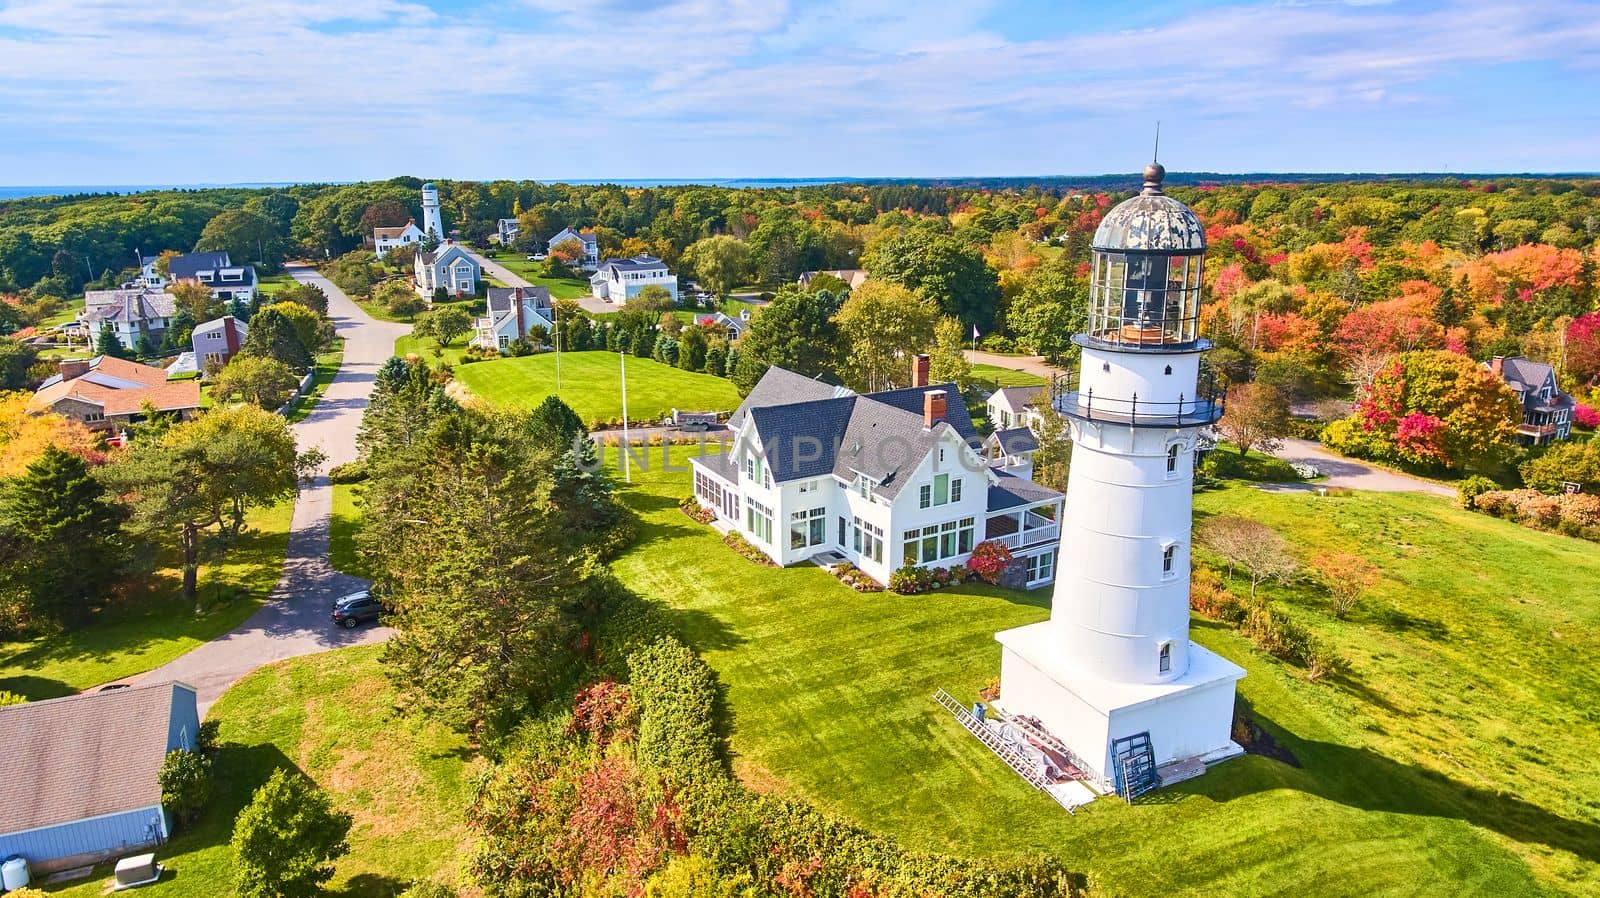 Homes and fall forest surround pair of Maine Lighthouses on ocean by njproductions